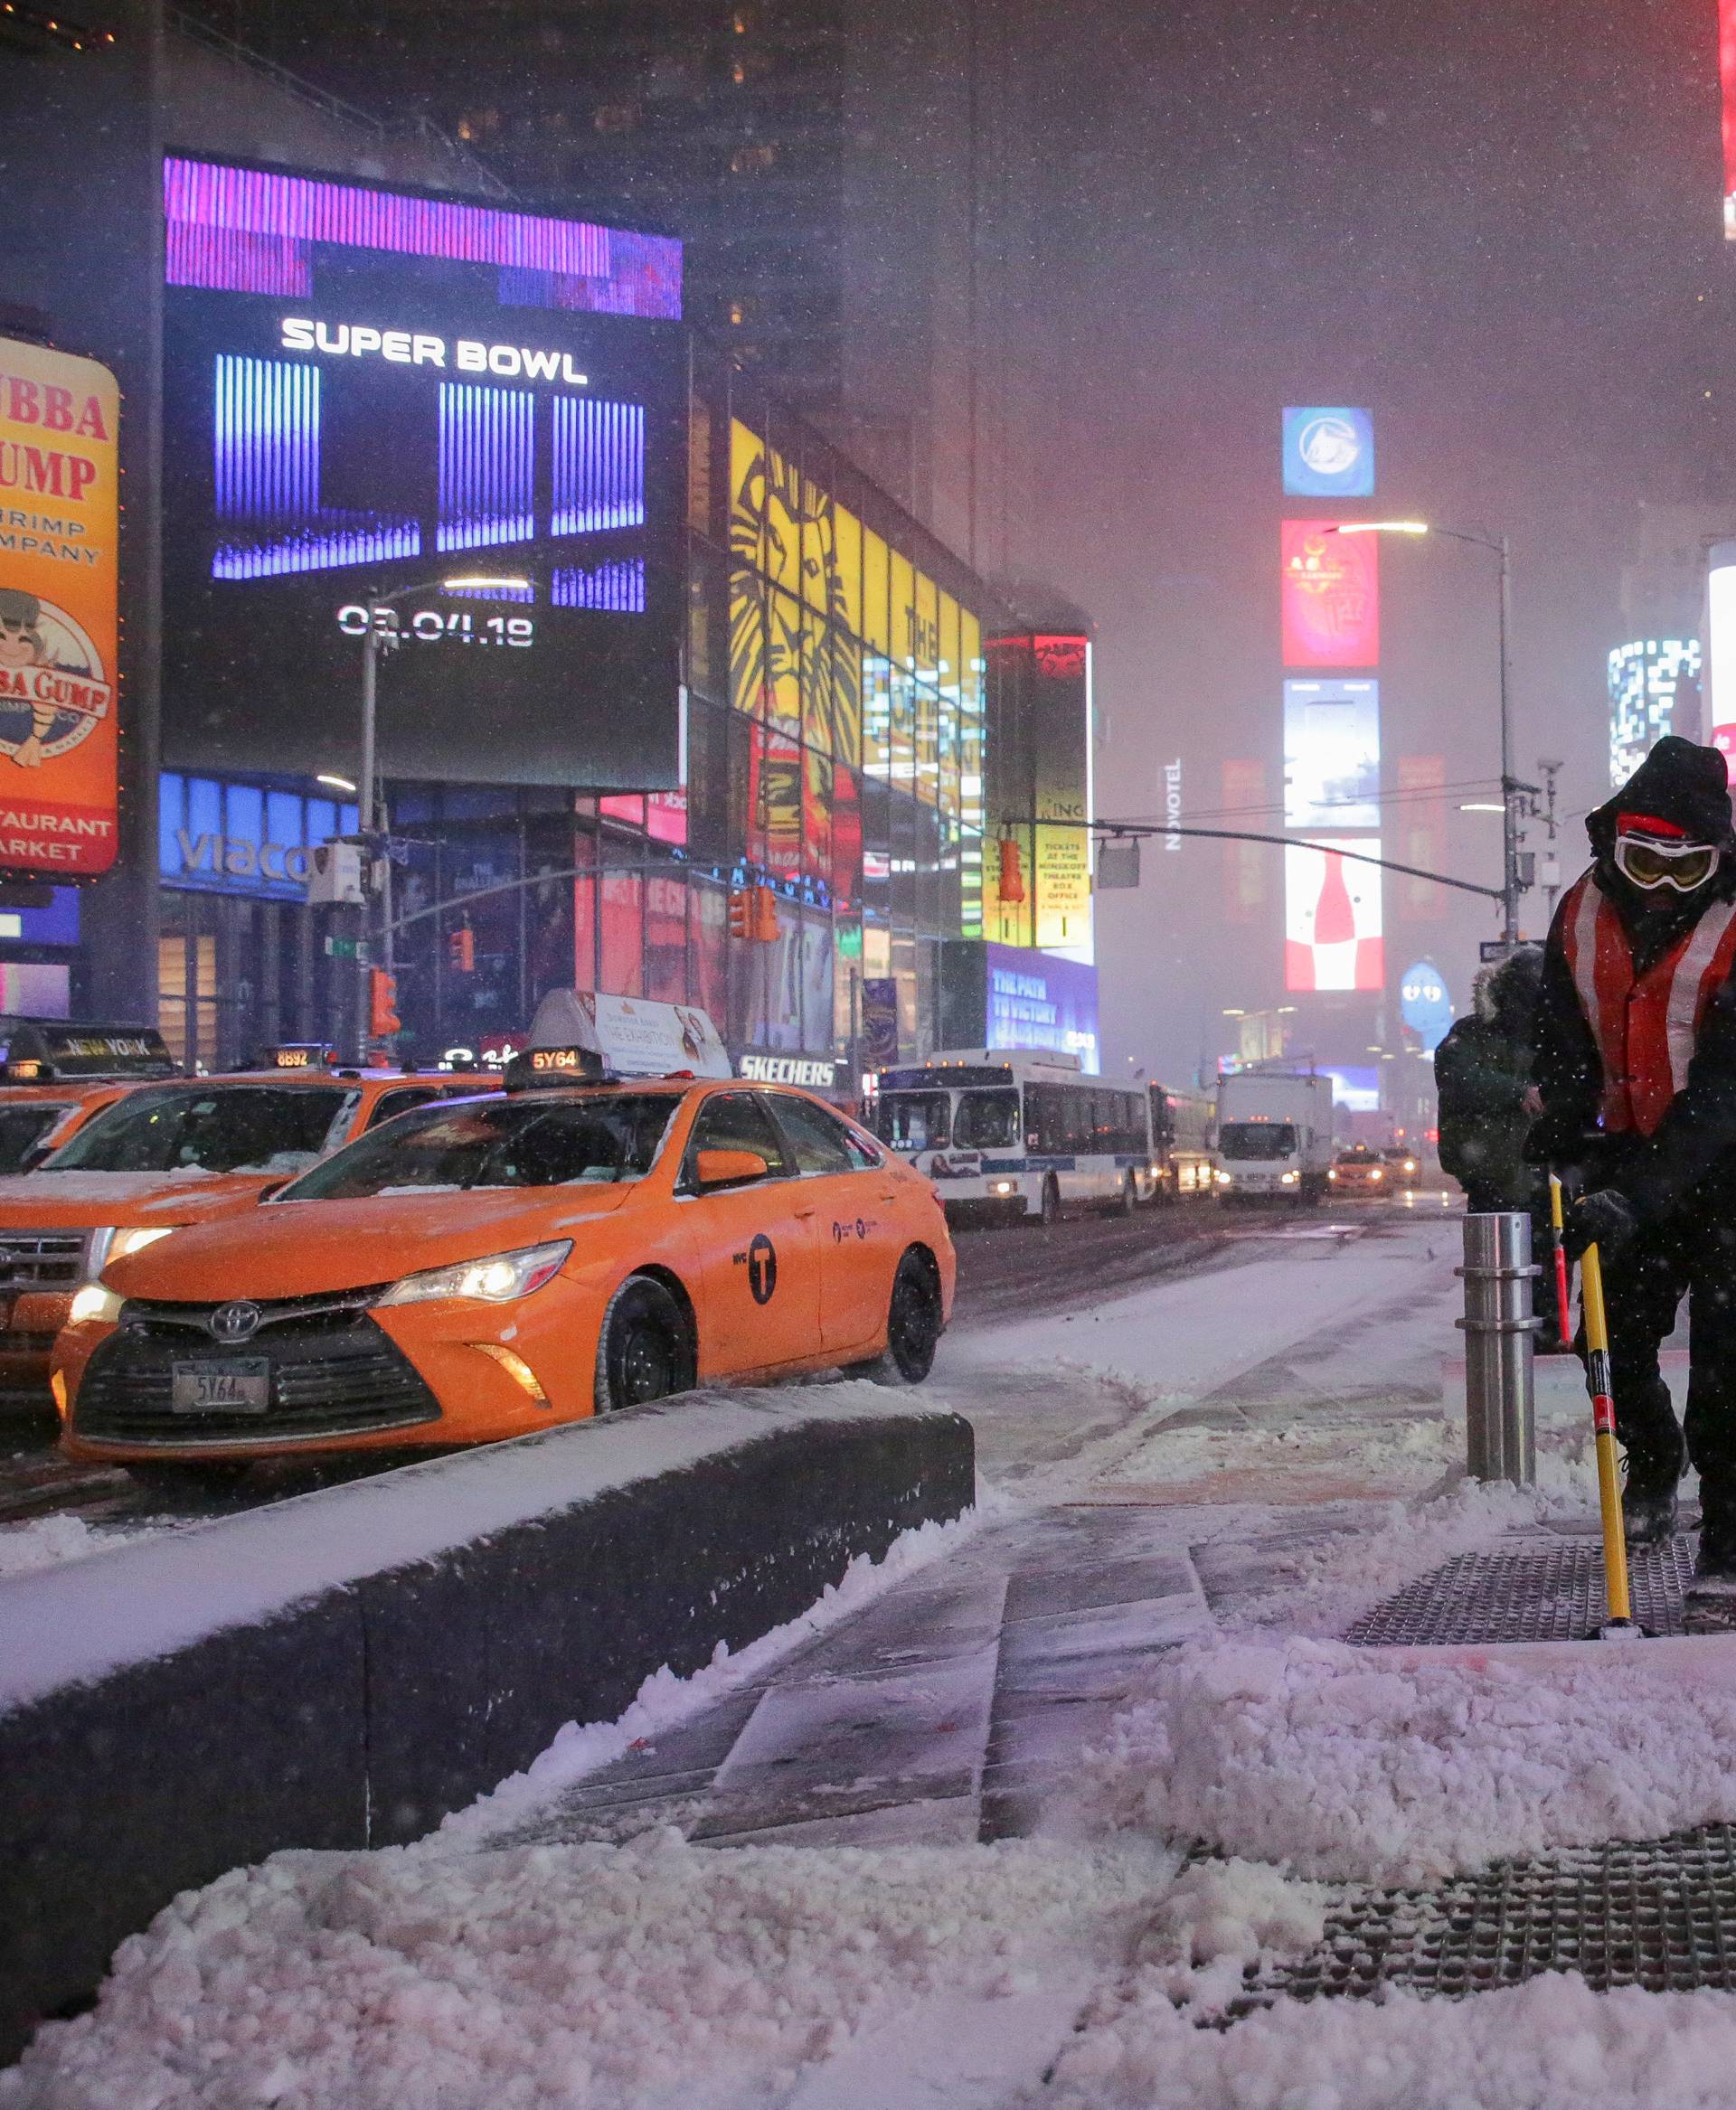 Workers remove snow during a snowstorm in Times Square in Manhattan